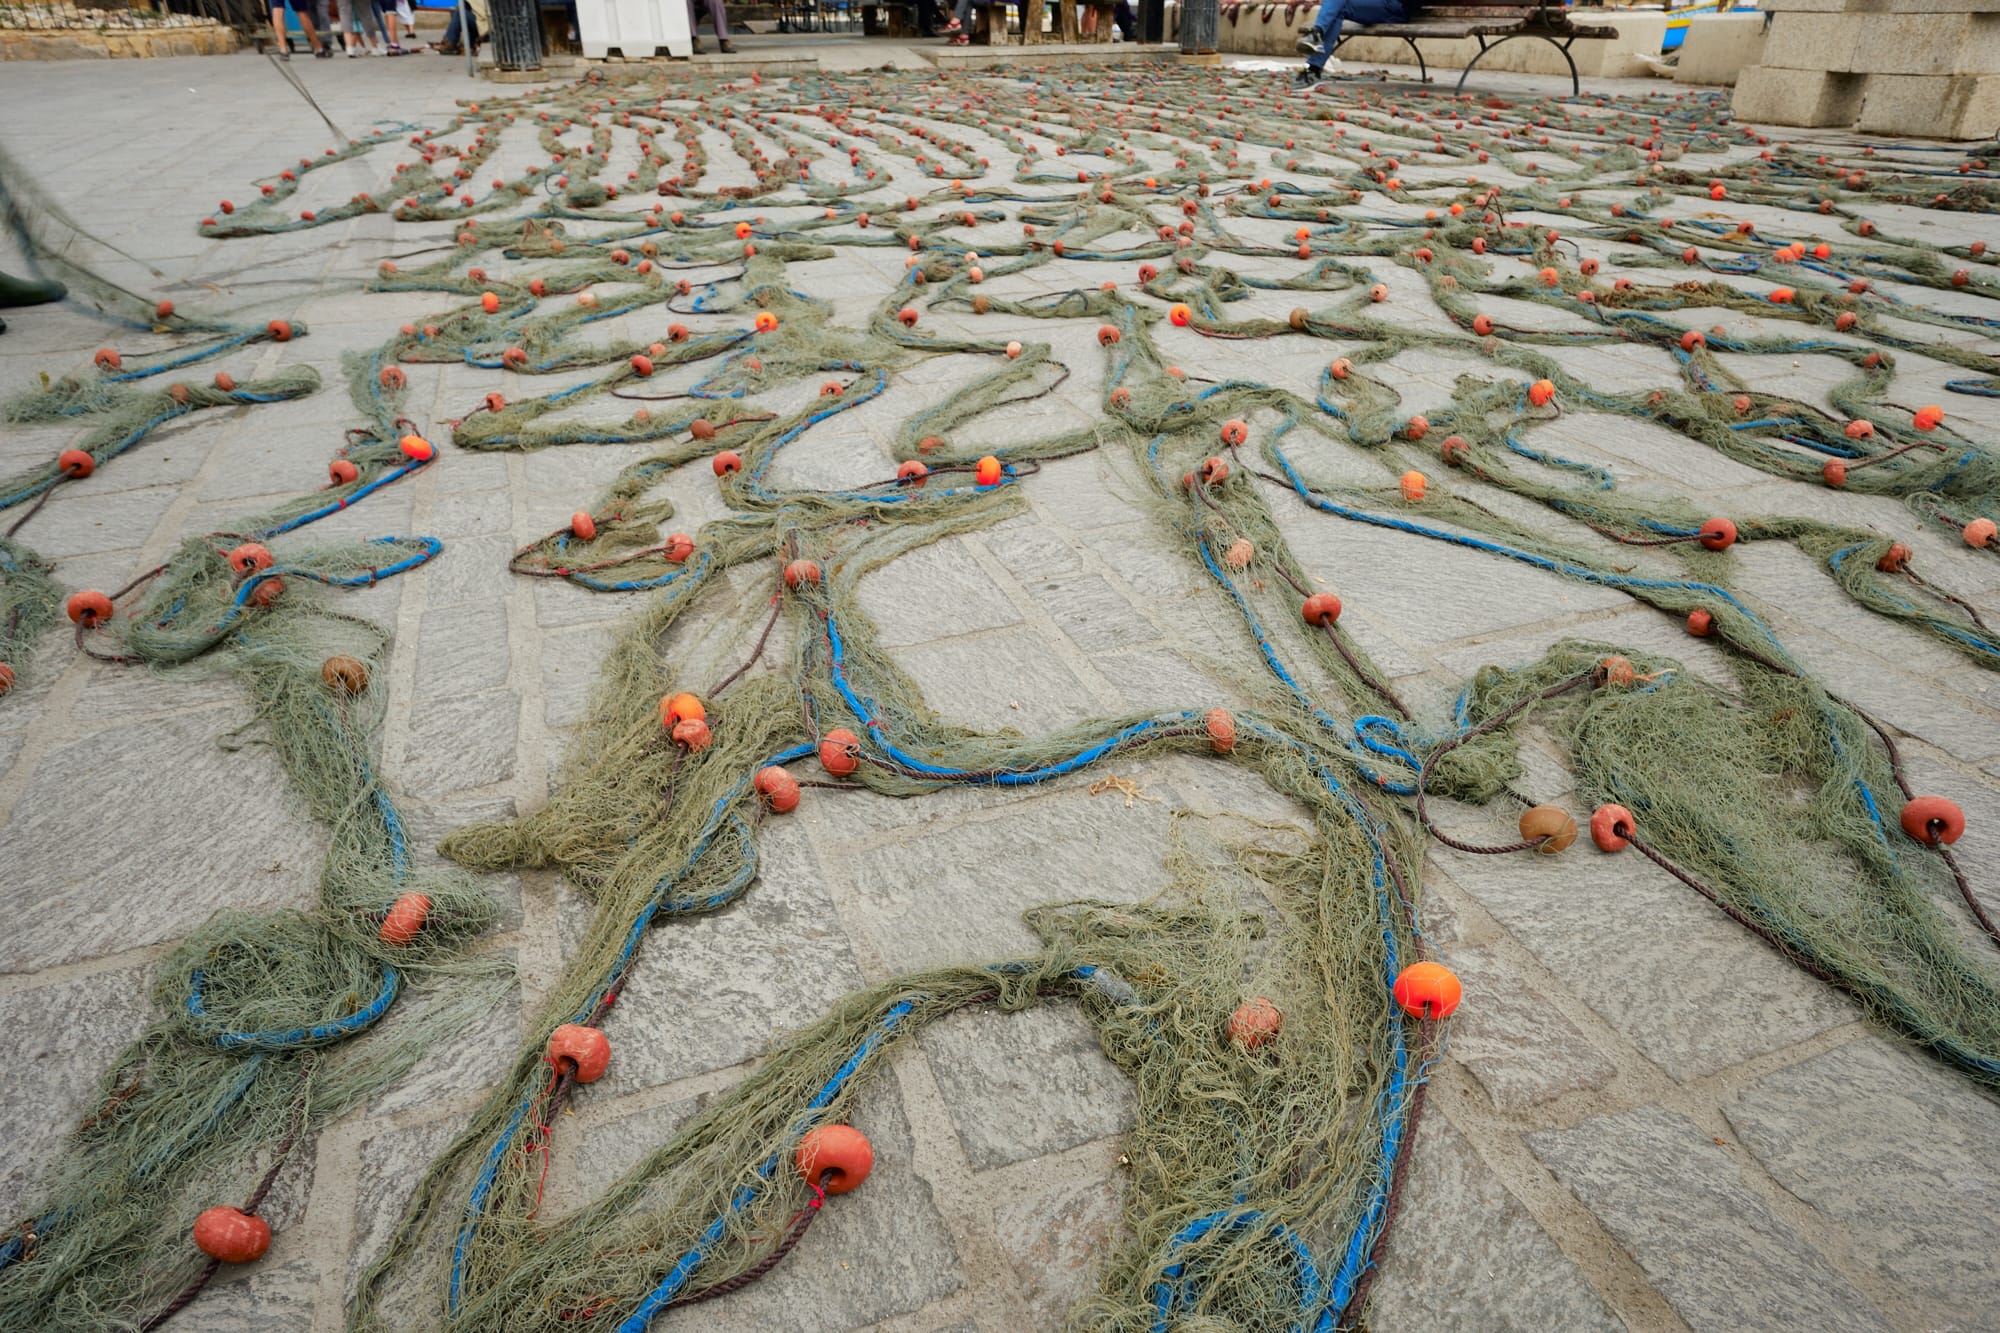 fishing nets spread out on the ground